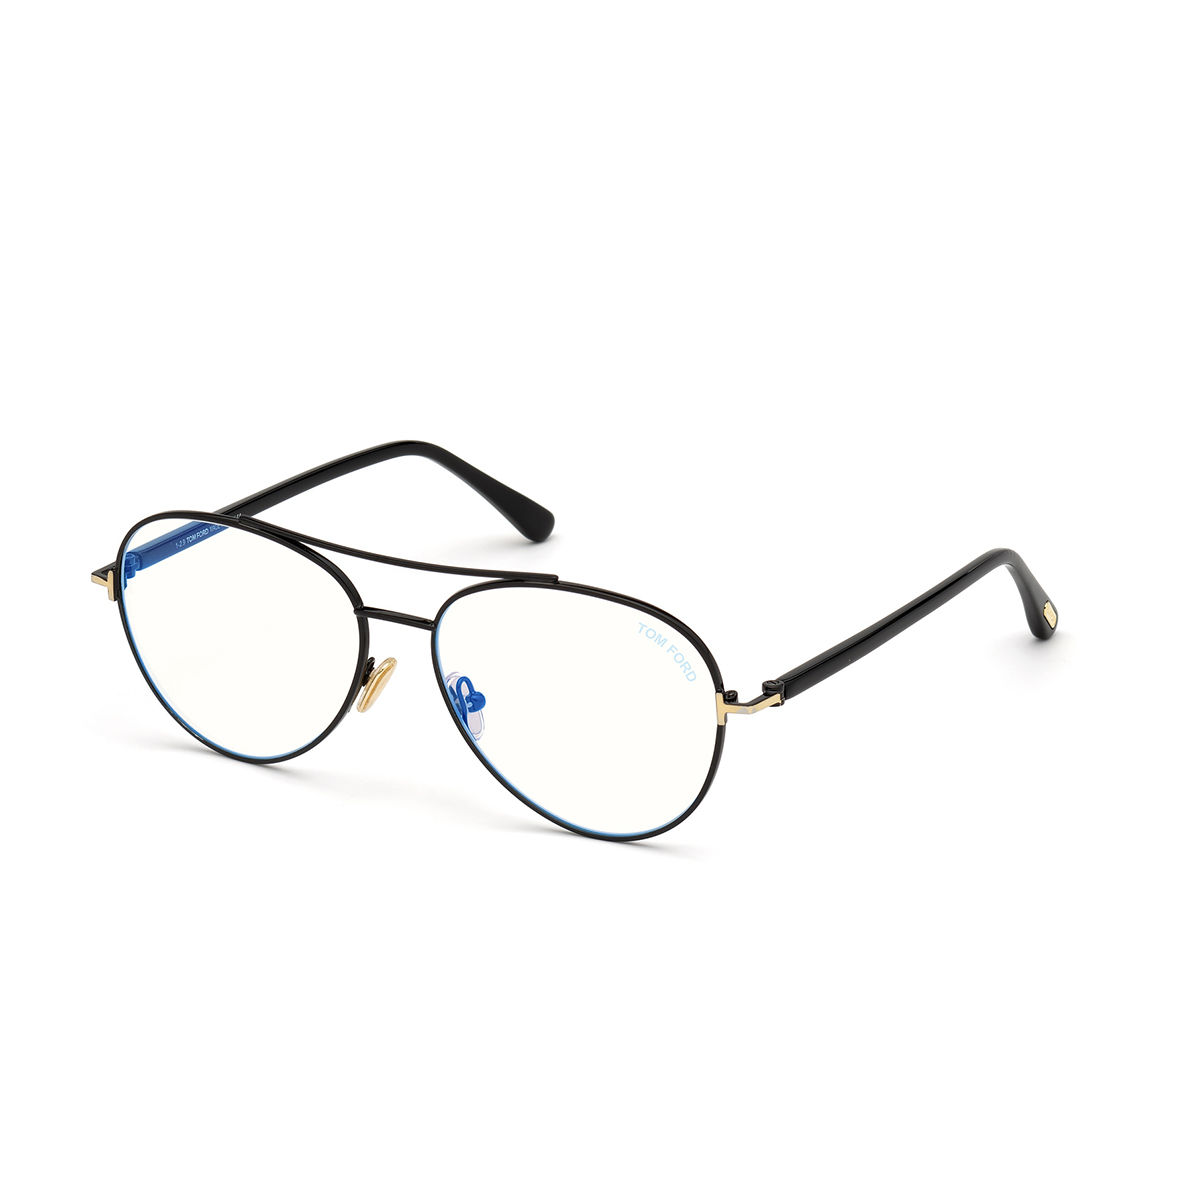 Tom Ford Sunglasses Black Metal Eyeglasses FT5684-B 55 001: Buy Tom Ford  Sunglasses Black Metal Eyeglasses FT5684-B 55 001 Online at Best Price in  India | Nykaa